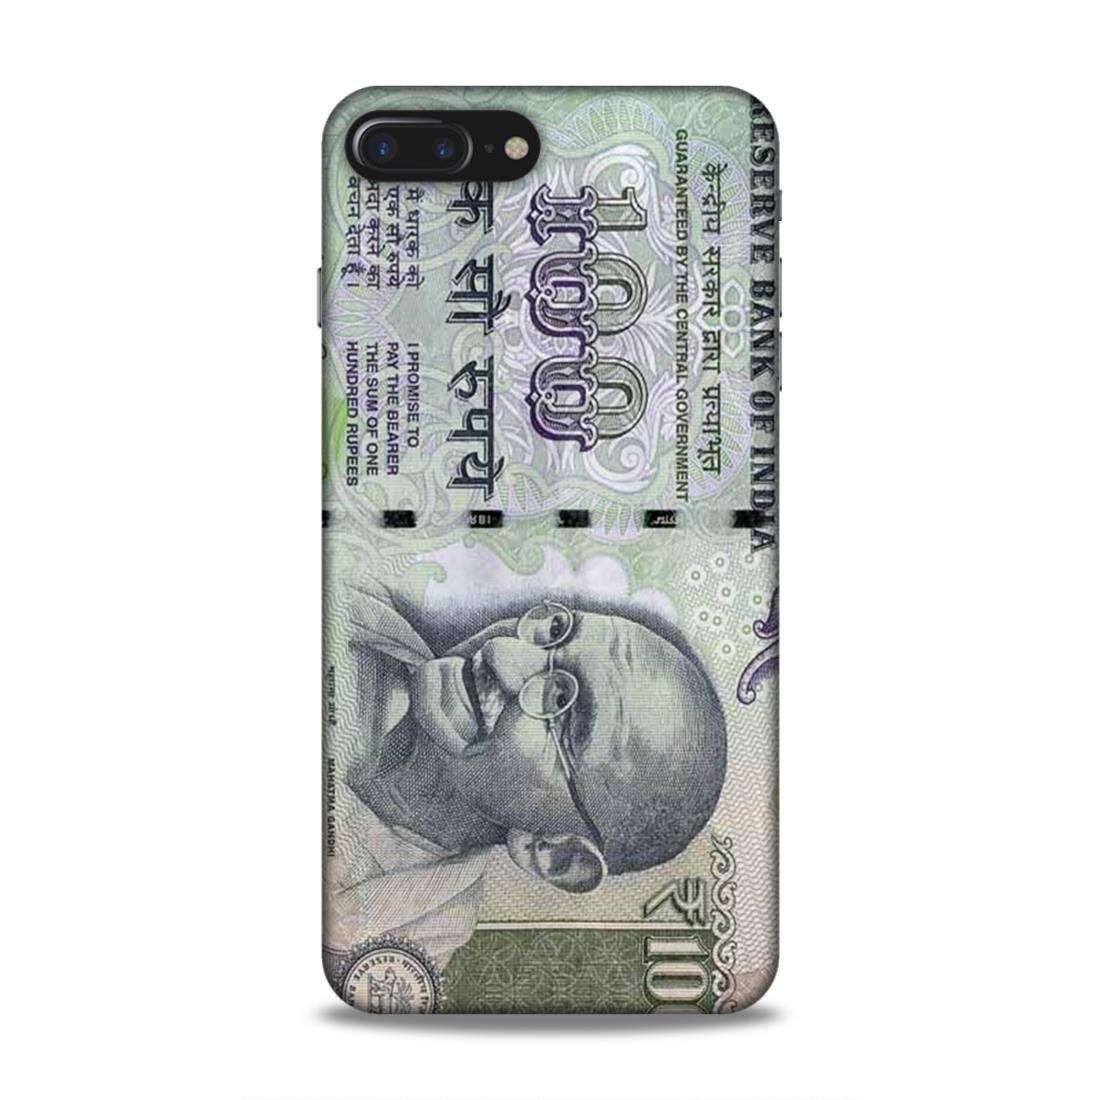 Rs 100 Currency Note iPhone 8 Plus Phone Cover Case